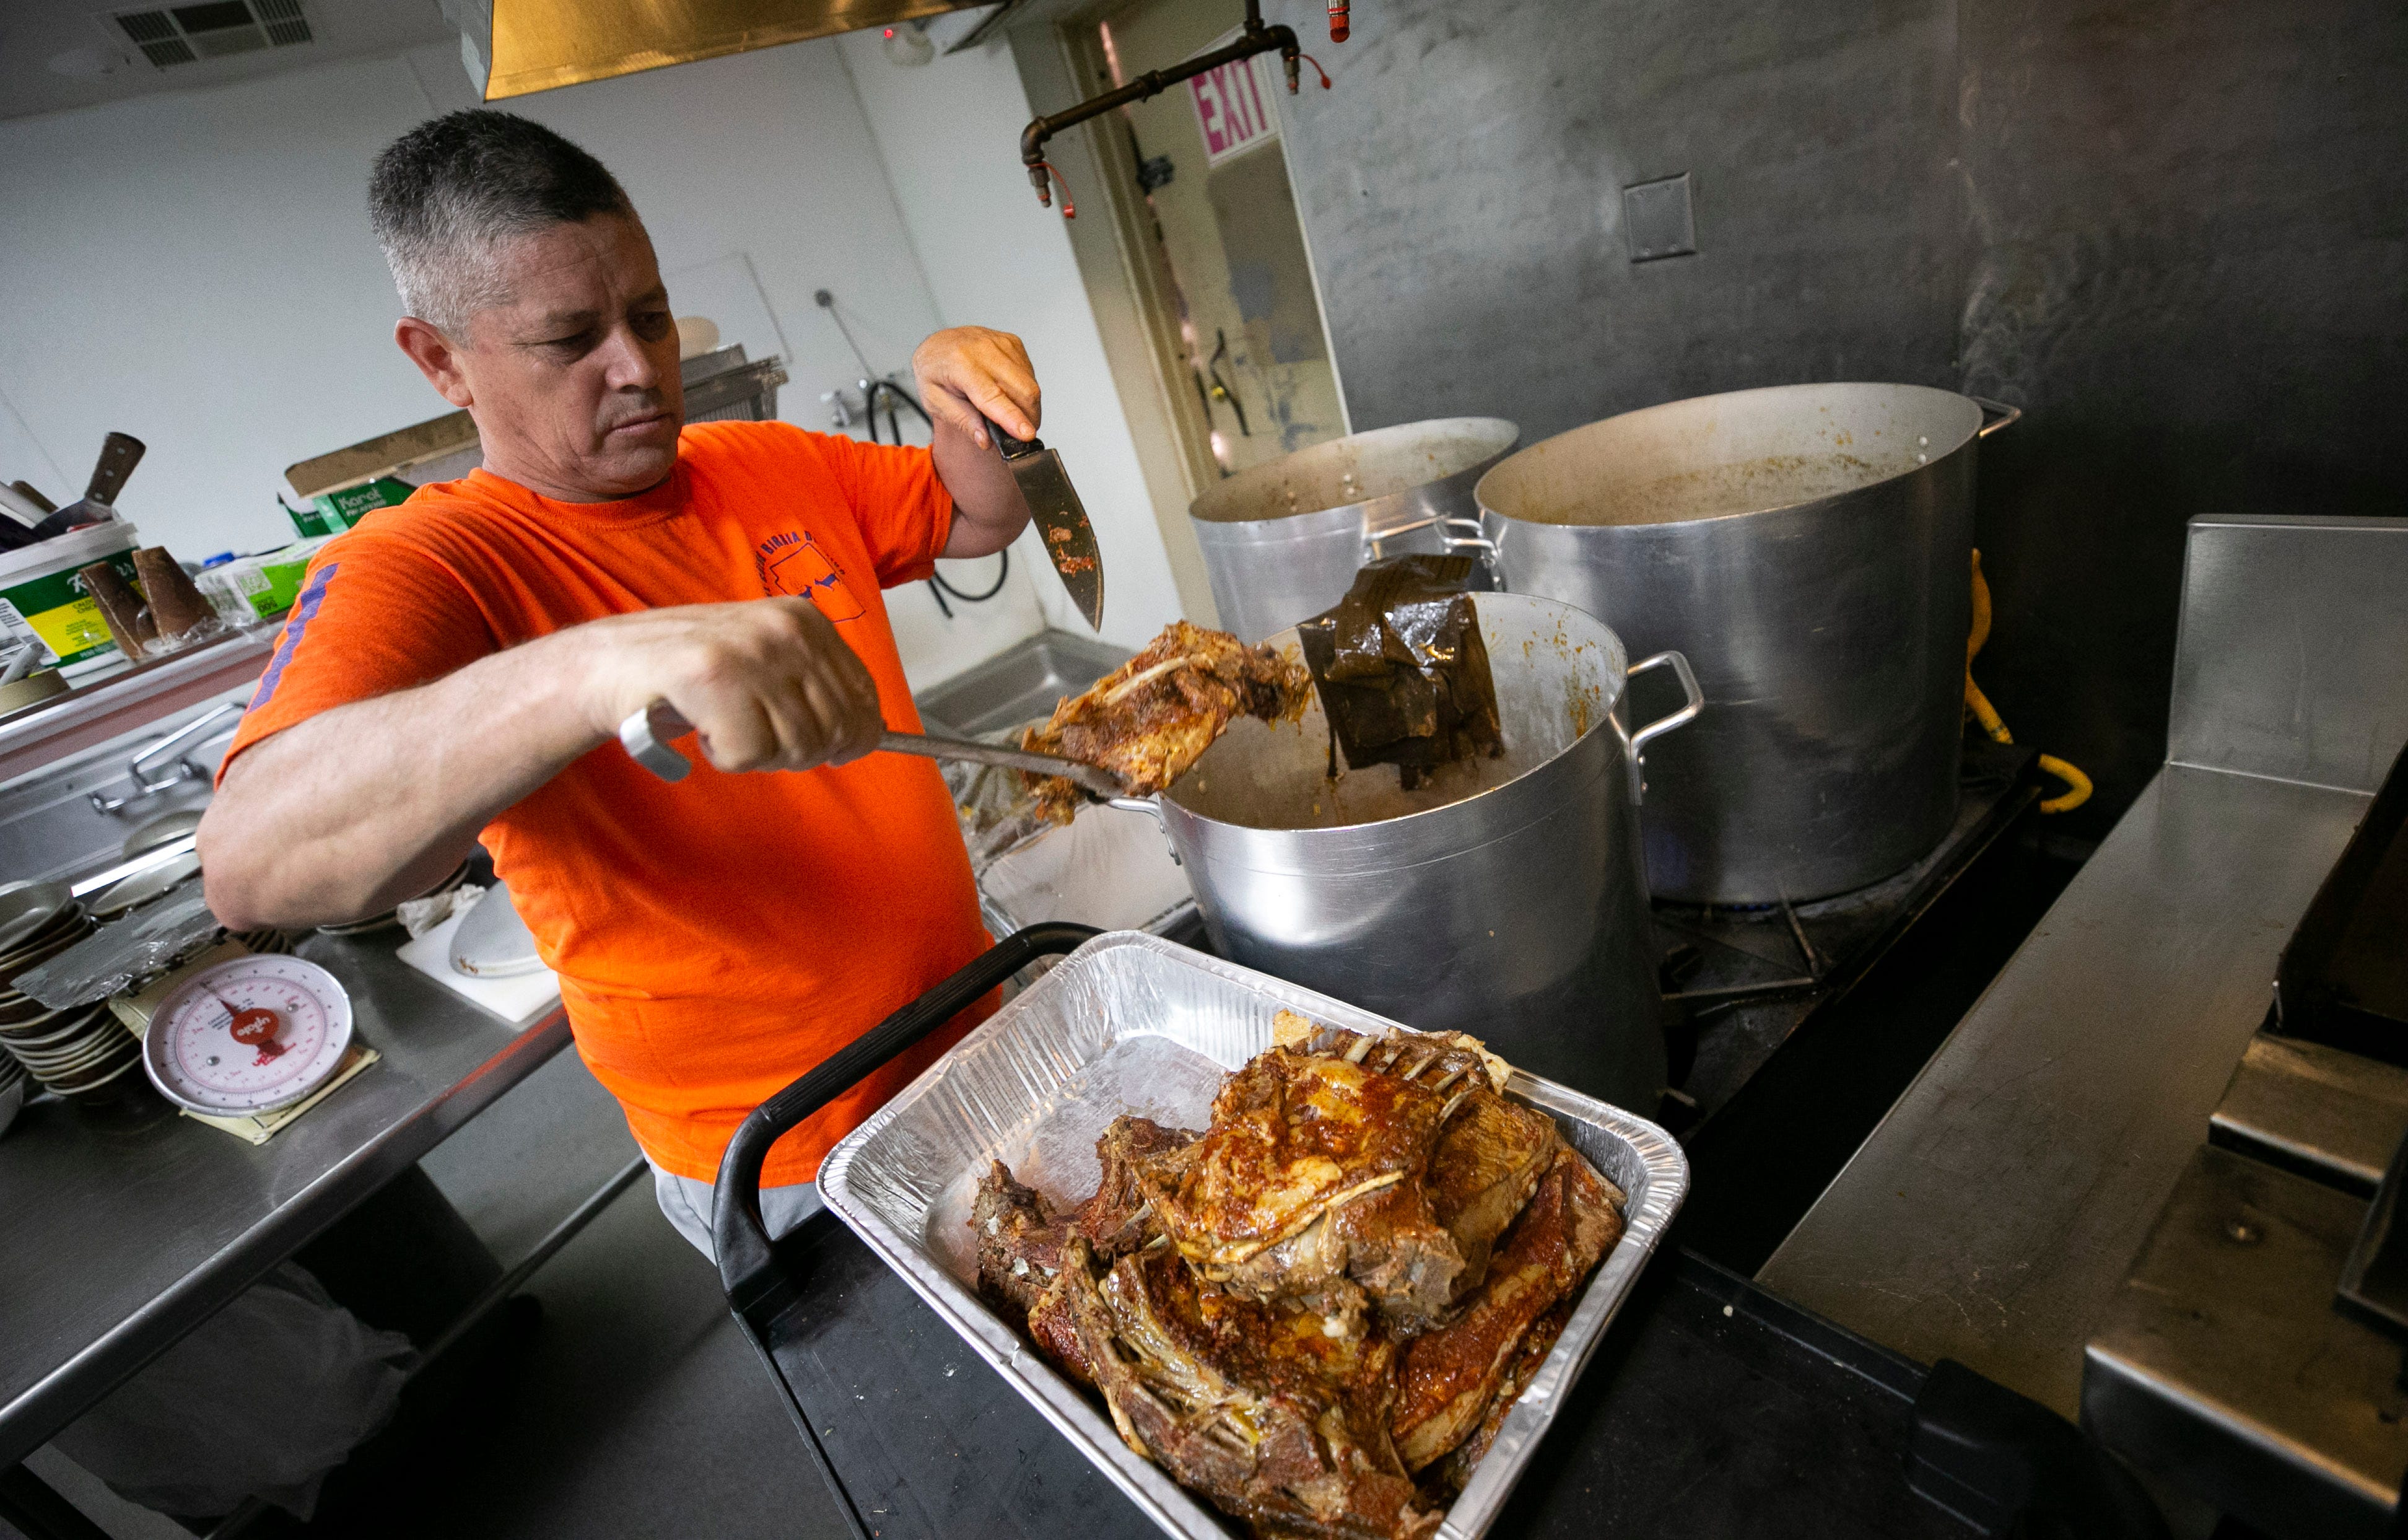 Jose Luis Garcia, owner and chef, takes birria (stewed goat meat) out of a pot after cooking all night at El Güero Birria de Chivo restaurant in south Phoenix on June 18, 2021.